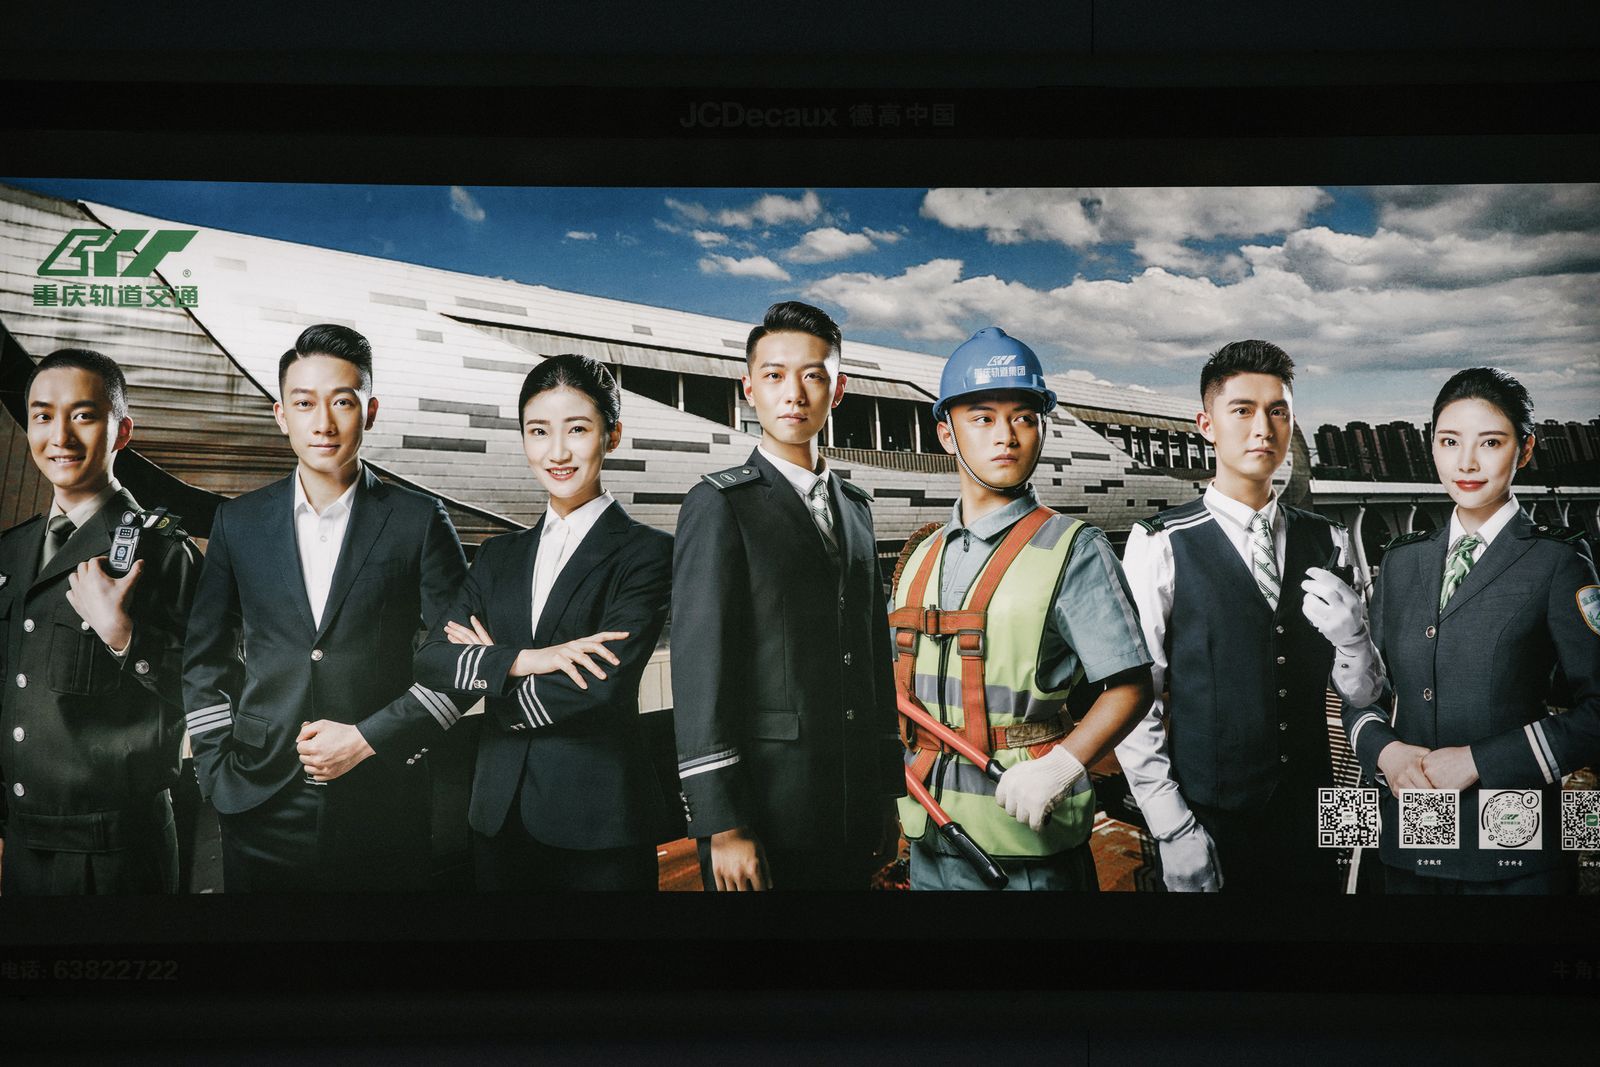 © Tianhu Yuan - Crews. Lightbox advertisement in the station depicts the crews of railway. They change the way of travels in the city.